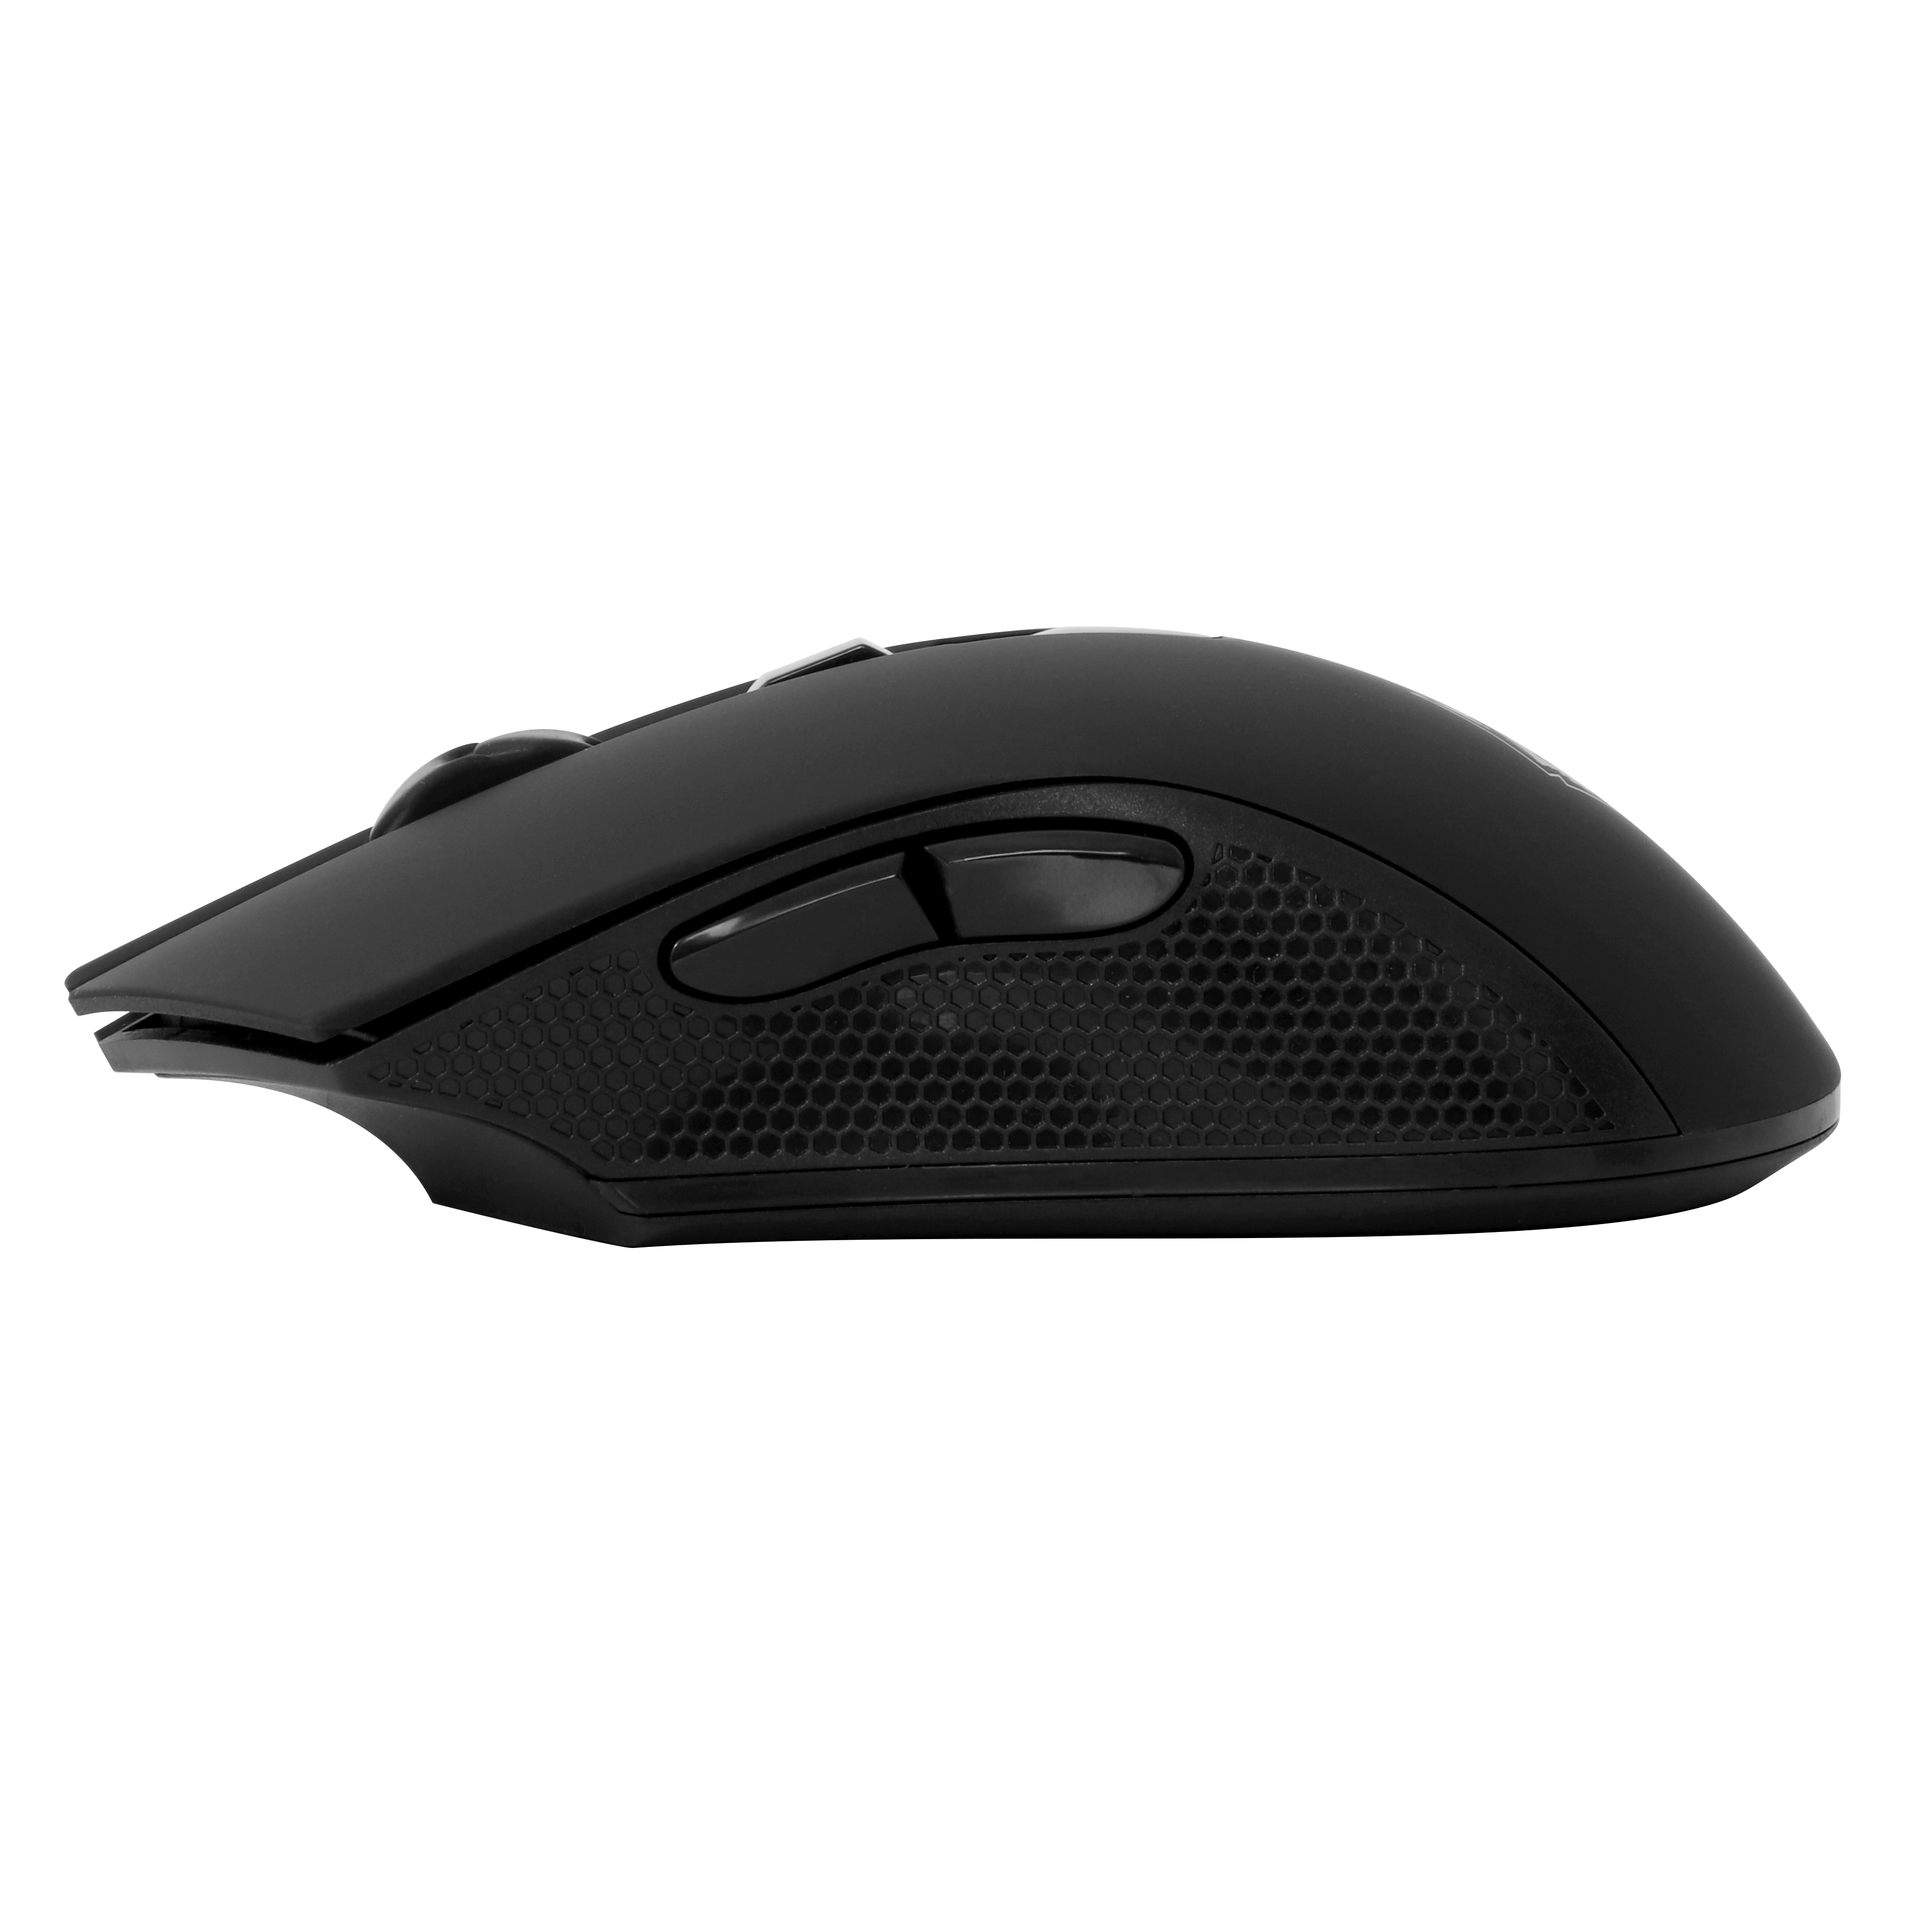 Orion Wireless 2.4GHz Gaming Mouse